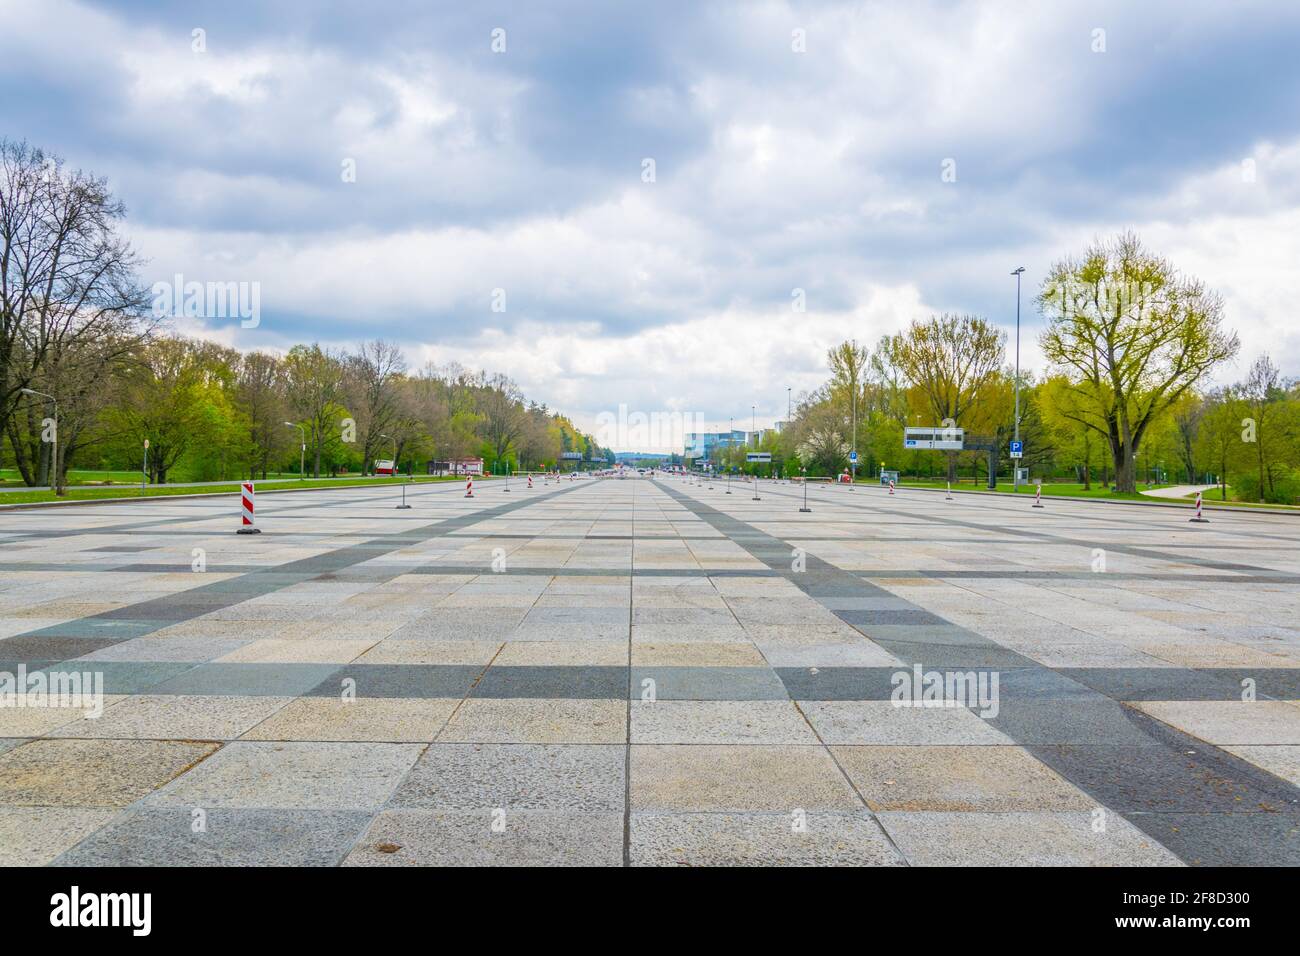 View of the grosse strasse street in the nazi party grounds in Nurnberg, Germany Stock Photo